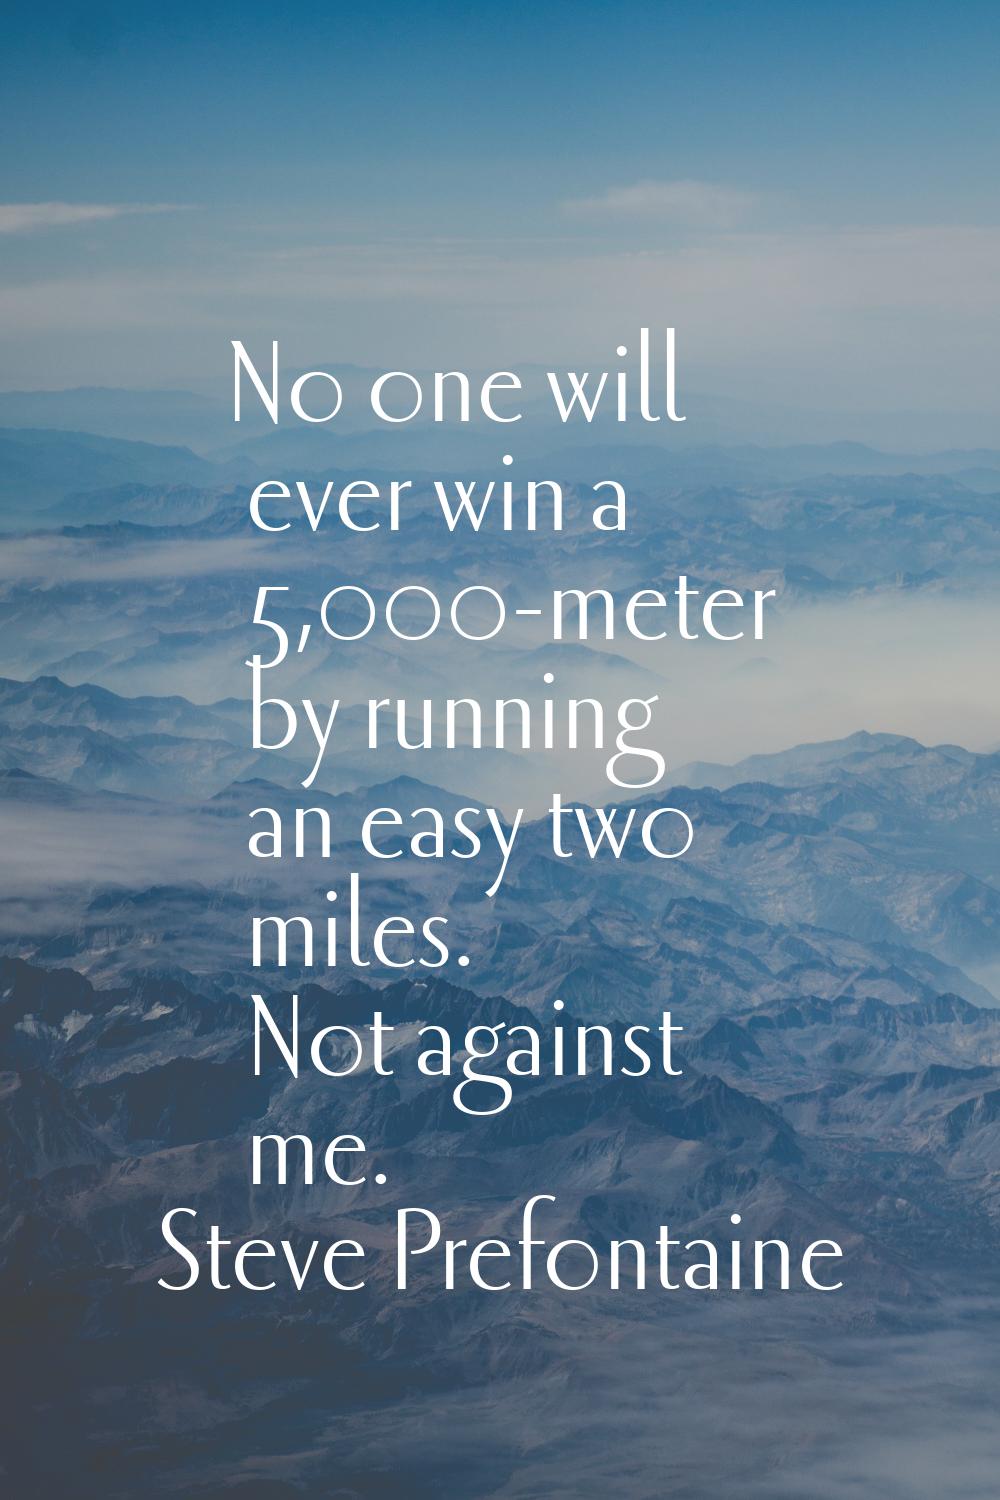 No one will ever win a 5,000-meter by running an easy two miles. Not against me.